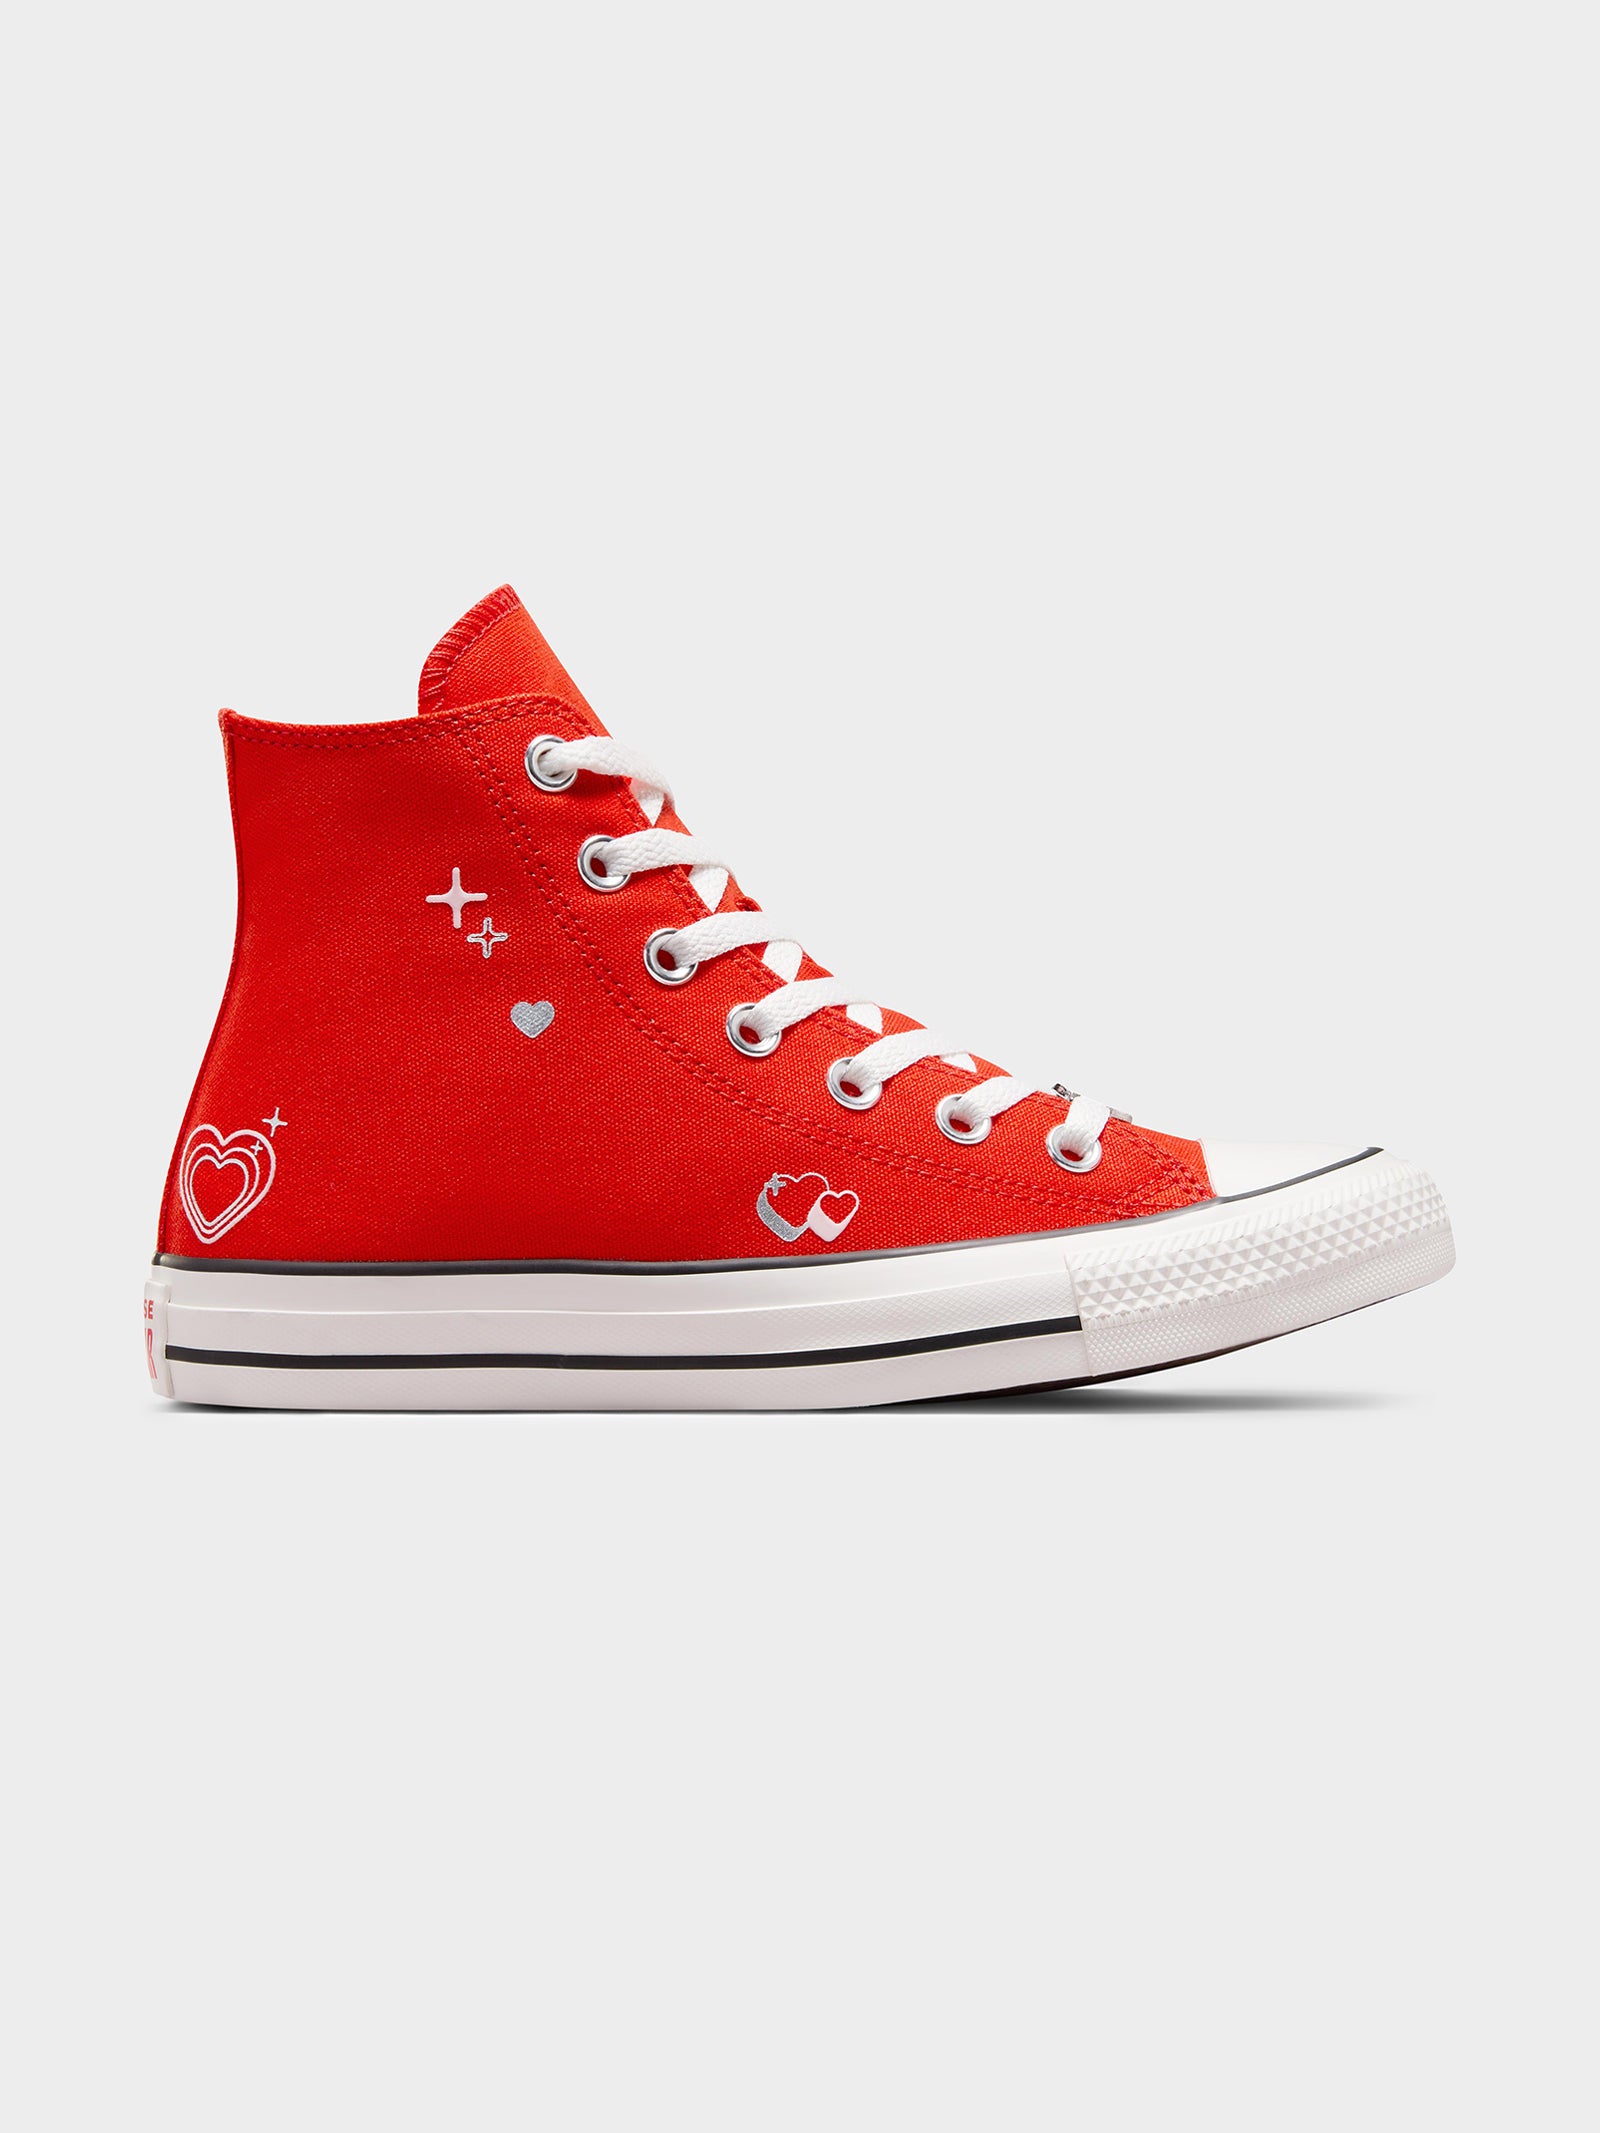 Womens Chuck Taylor All Star Y2K Heart High Top Sneakers in Fever Dream & Vintage White